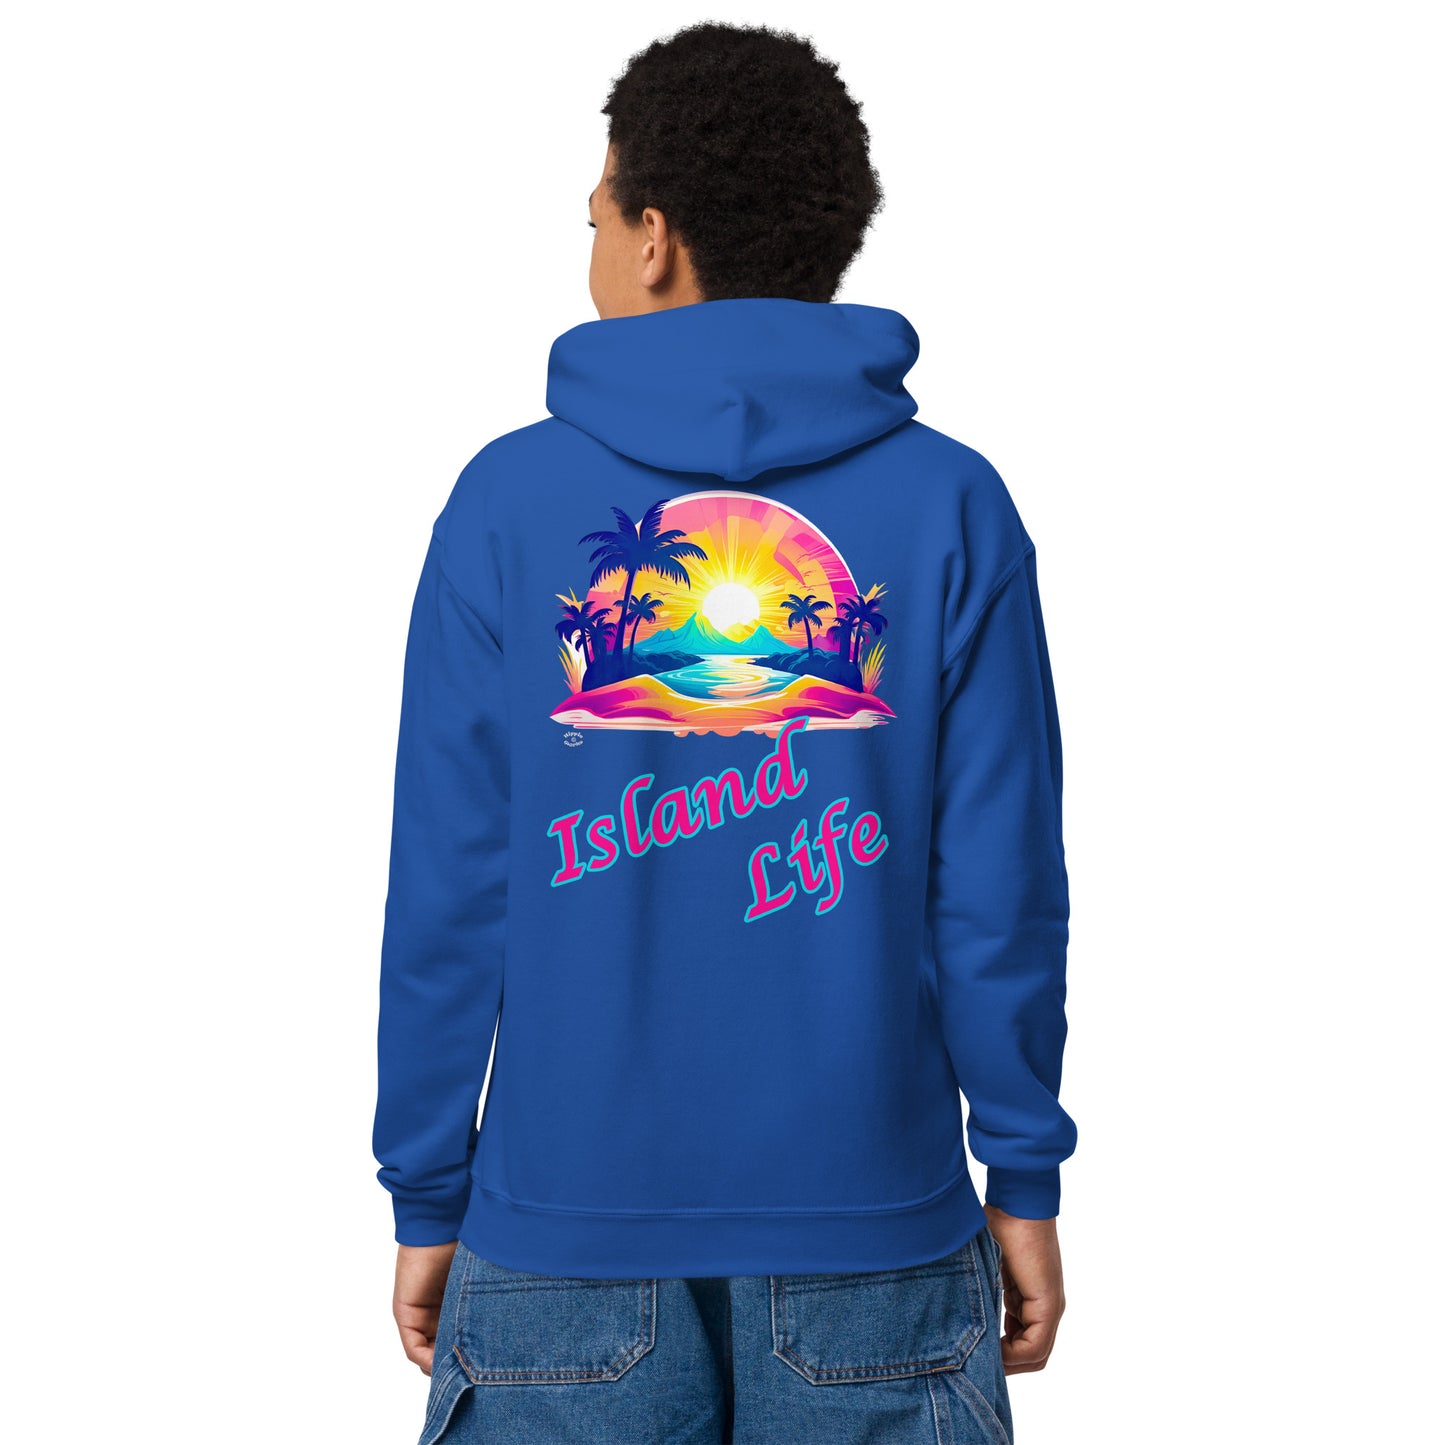 A picture of a boy modeling a hoodie with a large picture on the back of a tropical island paradise abd the text Island Life underneath - royal blue